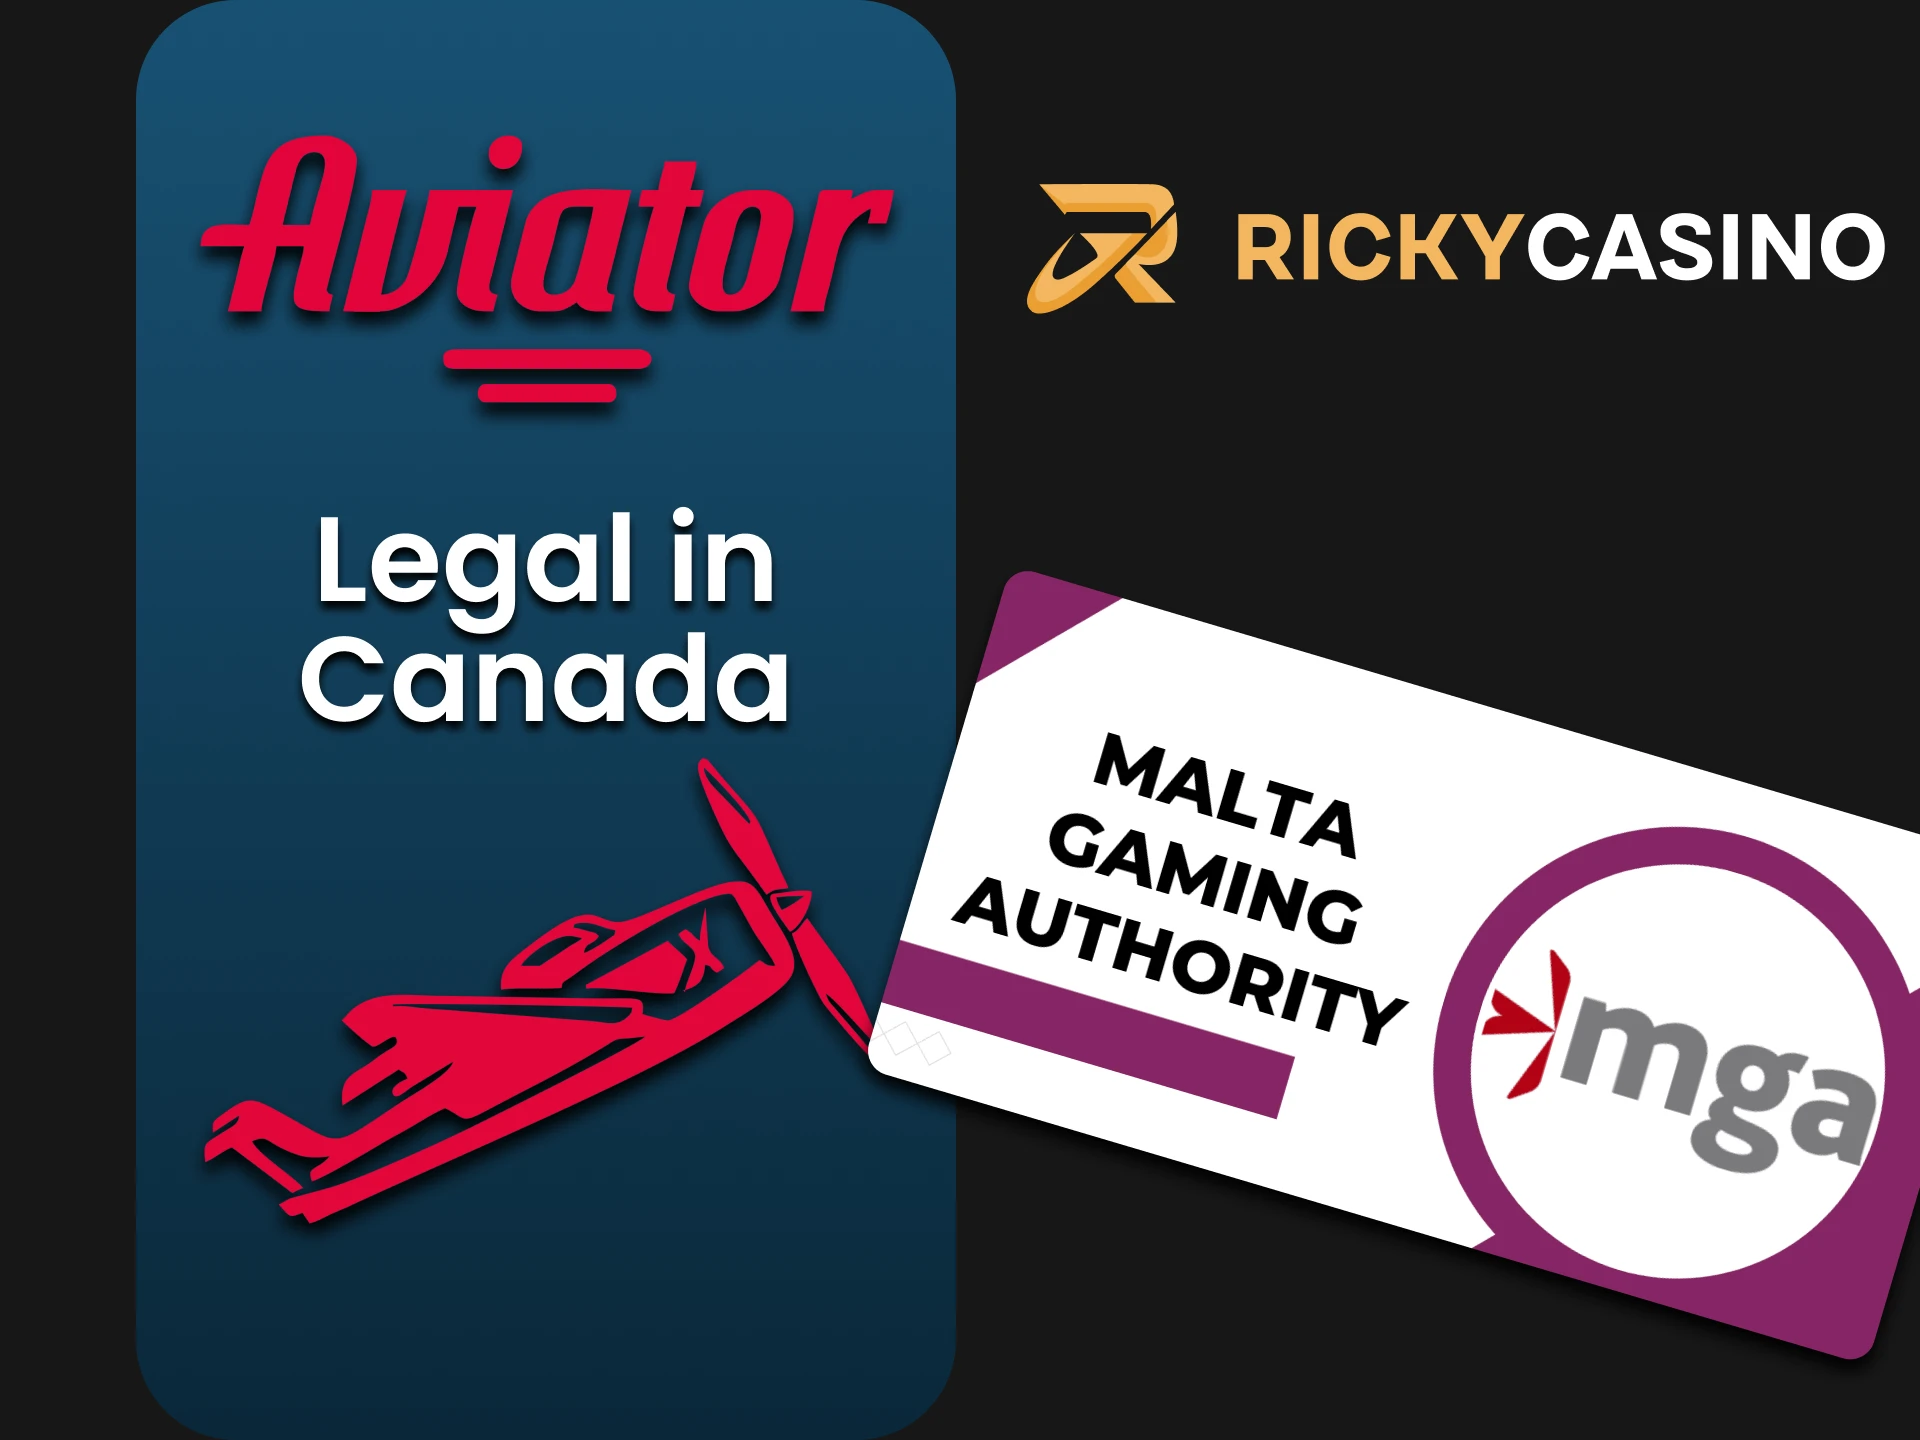 We will tell you about the license for the Aviator game at Ricky Casino.